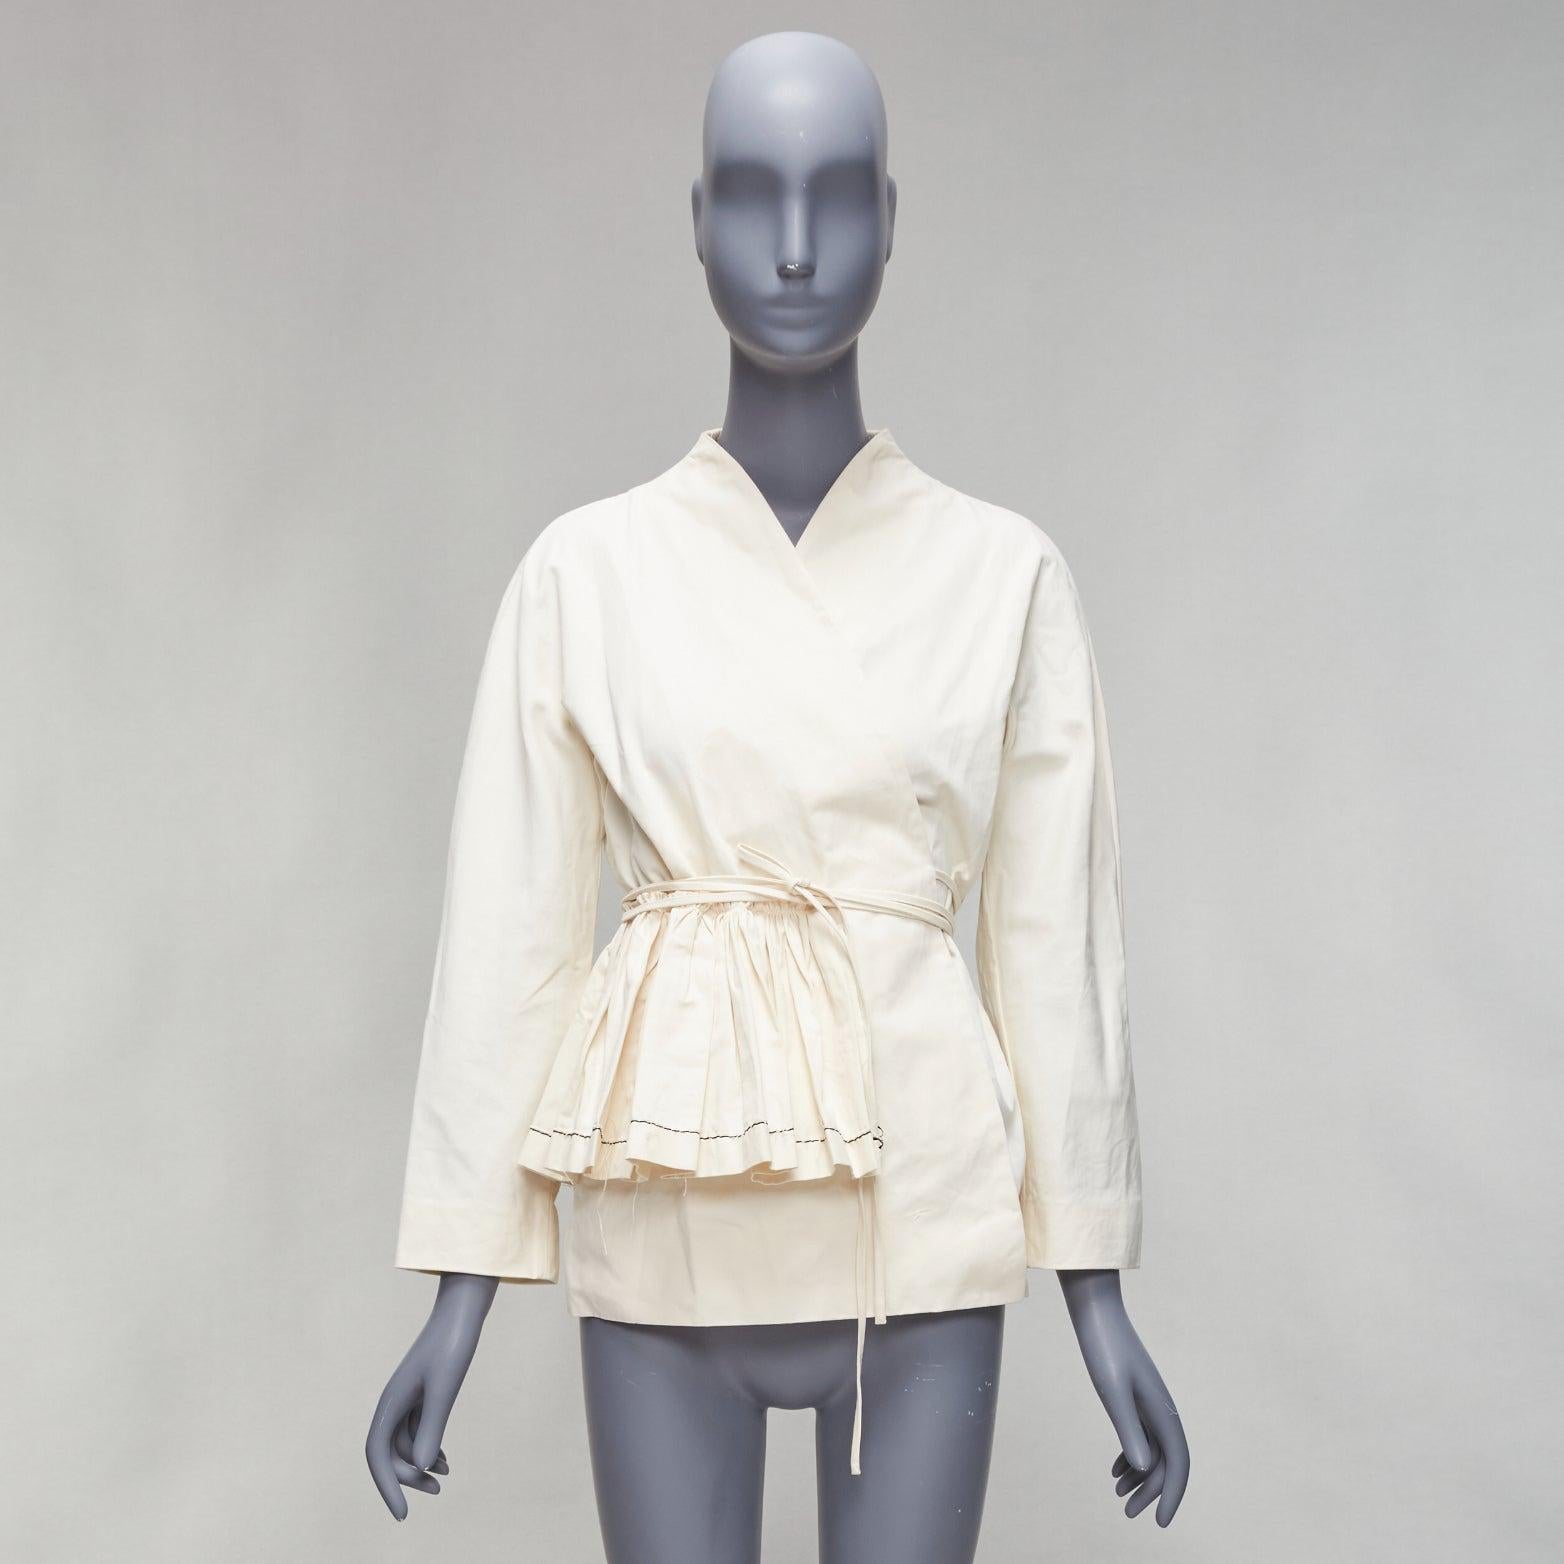 MARNI cream cotton linen pleated front wrap tie dolman belted jacket IT40 S
Reference: CELG/A00415
Brand: Marni
Material: Cotton, Linen
Color: Cream
Pattern: Solid
Closure: Wrap Tie
Extra Details: Zen style with dolman sleeve.
Made in: